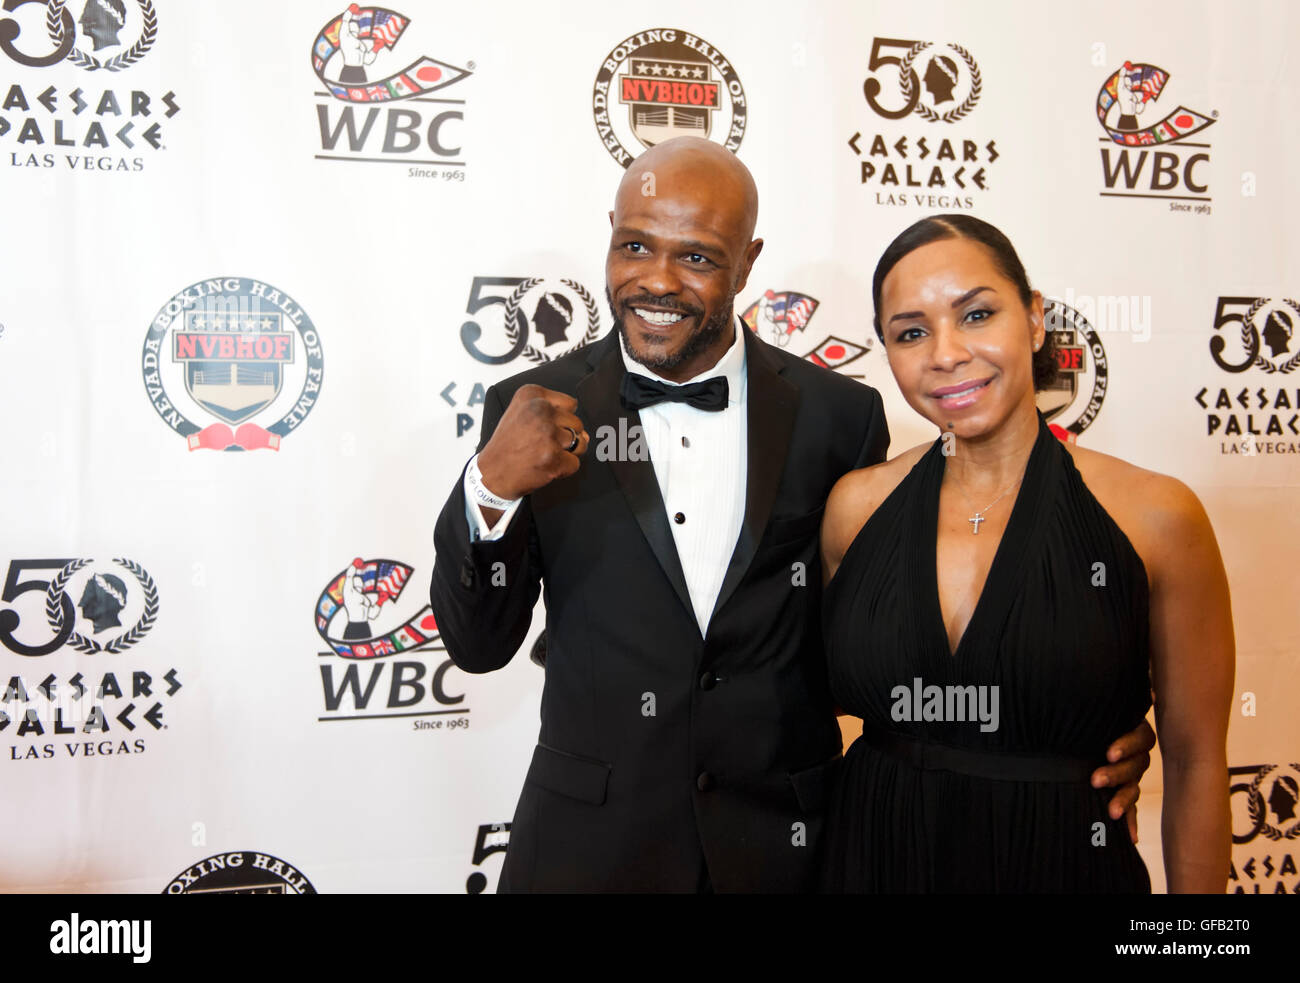 Caesars Palace, Las Vegas, Nevada, USA. 30th July, 2016. Terry and Tanya Norris on the red carpet at the 4th Annual Nevada Boxing Hall of Fame Induction Ceremony Credit:  Ken Howard/Alamy Live News Stock Photo